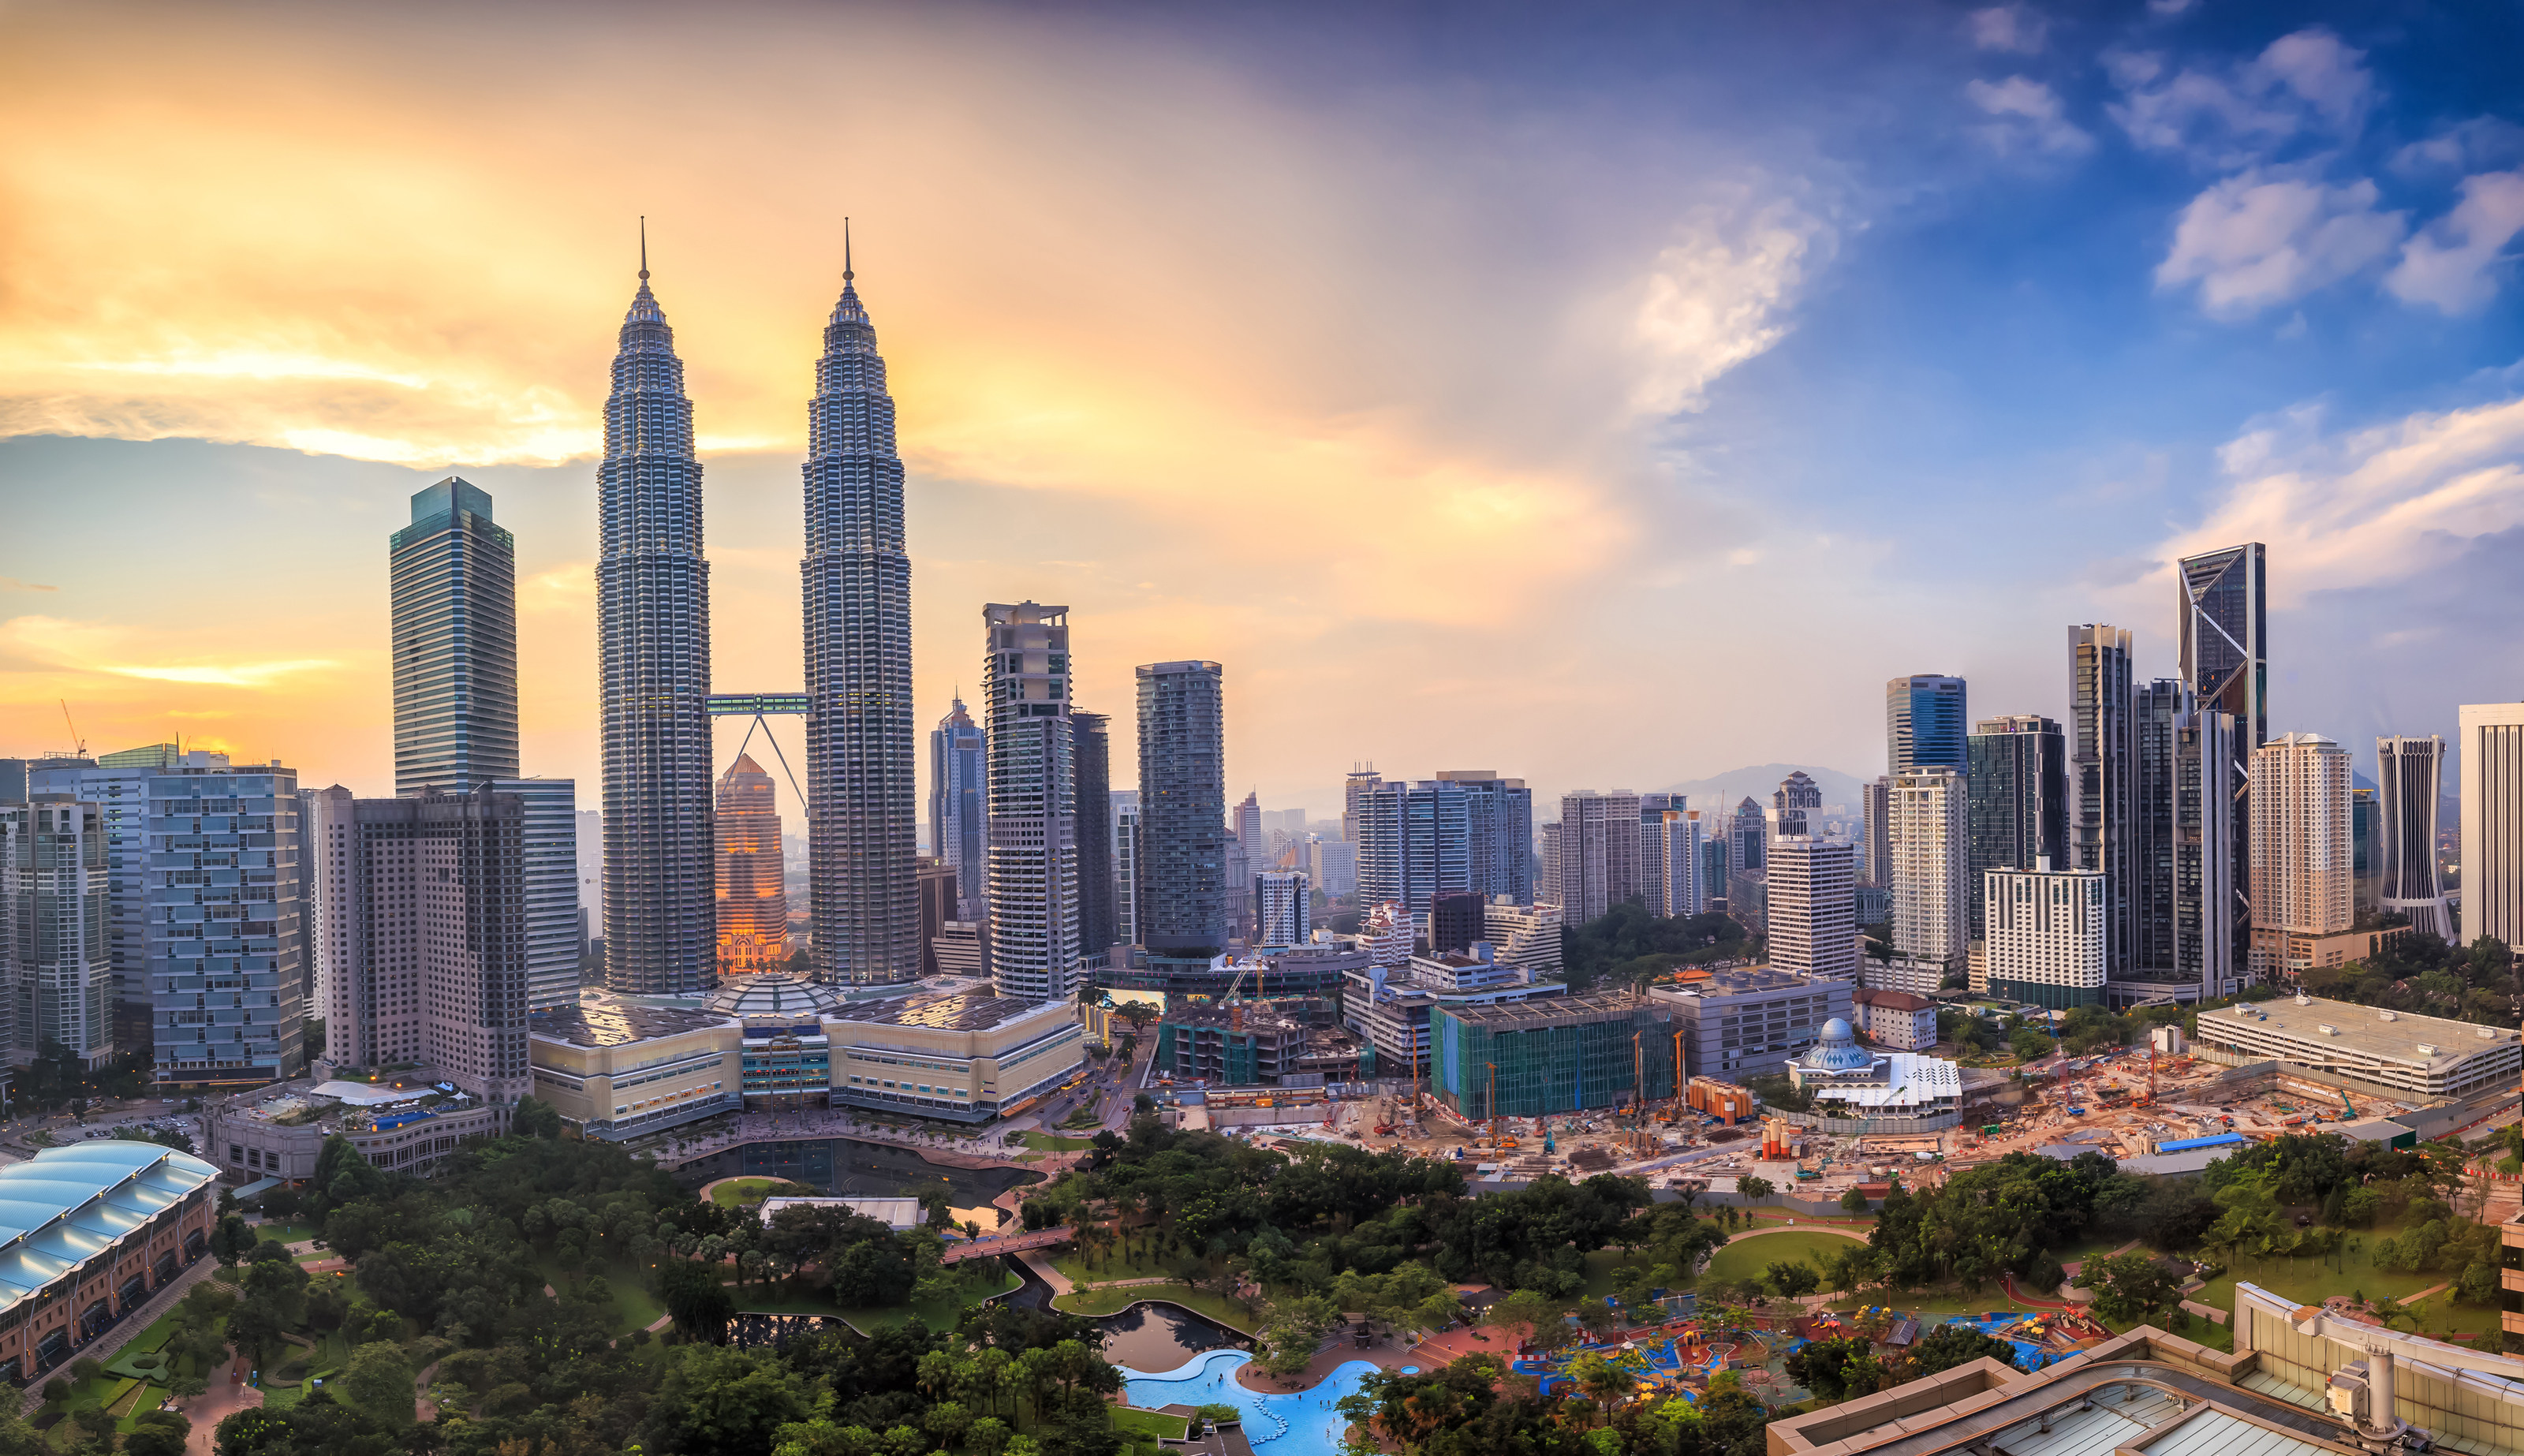 Kuala Lumpur will host the Selangor International Business Summit later this year, in a bid to raise the Malaysian state’s profile as an investment destination in Asean. Photo: Shutterstock
